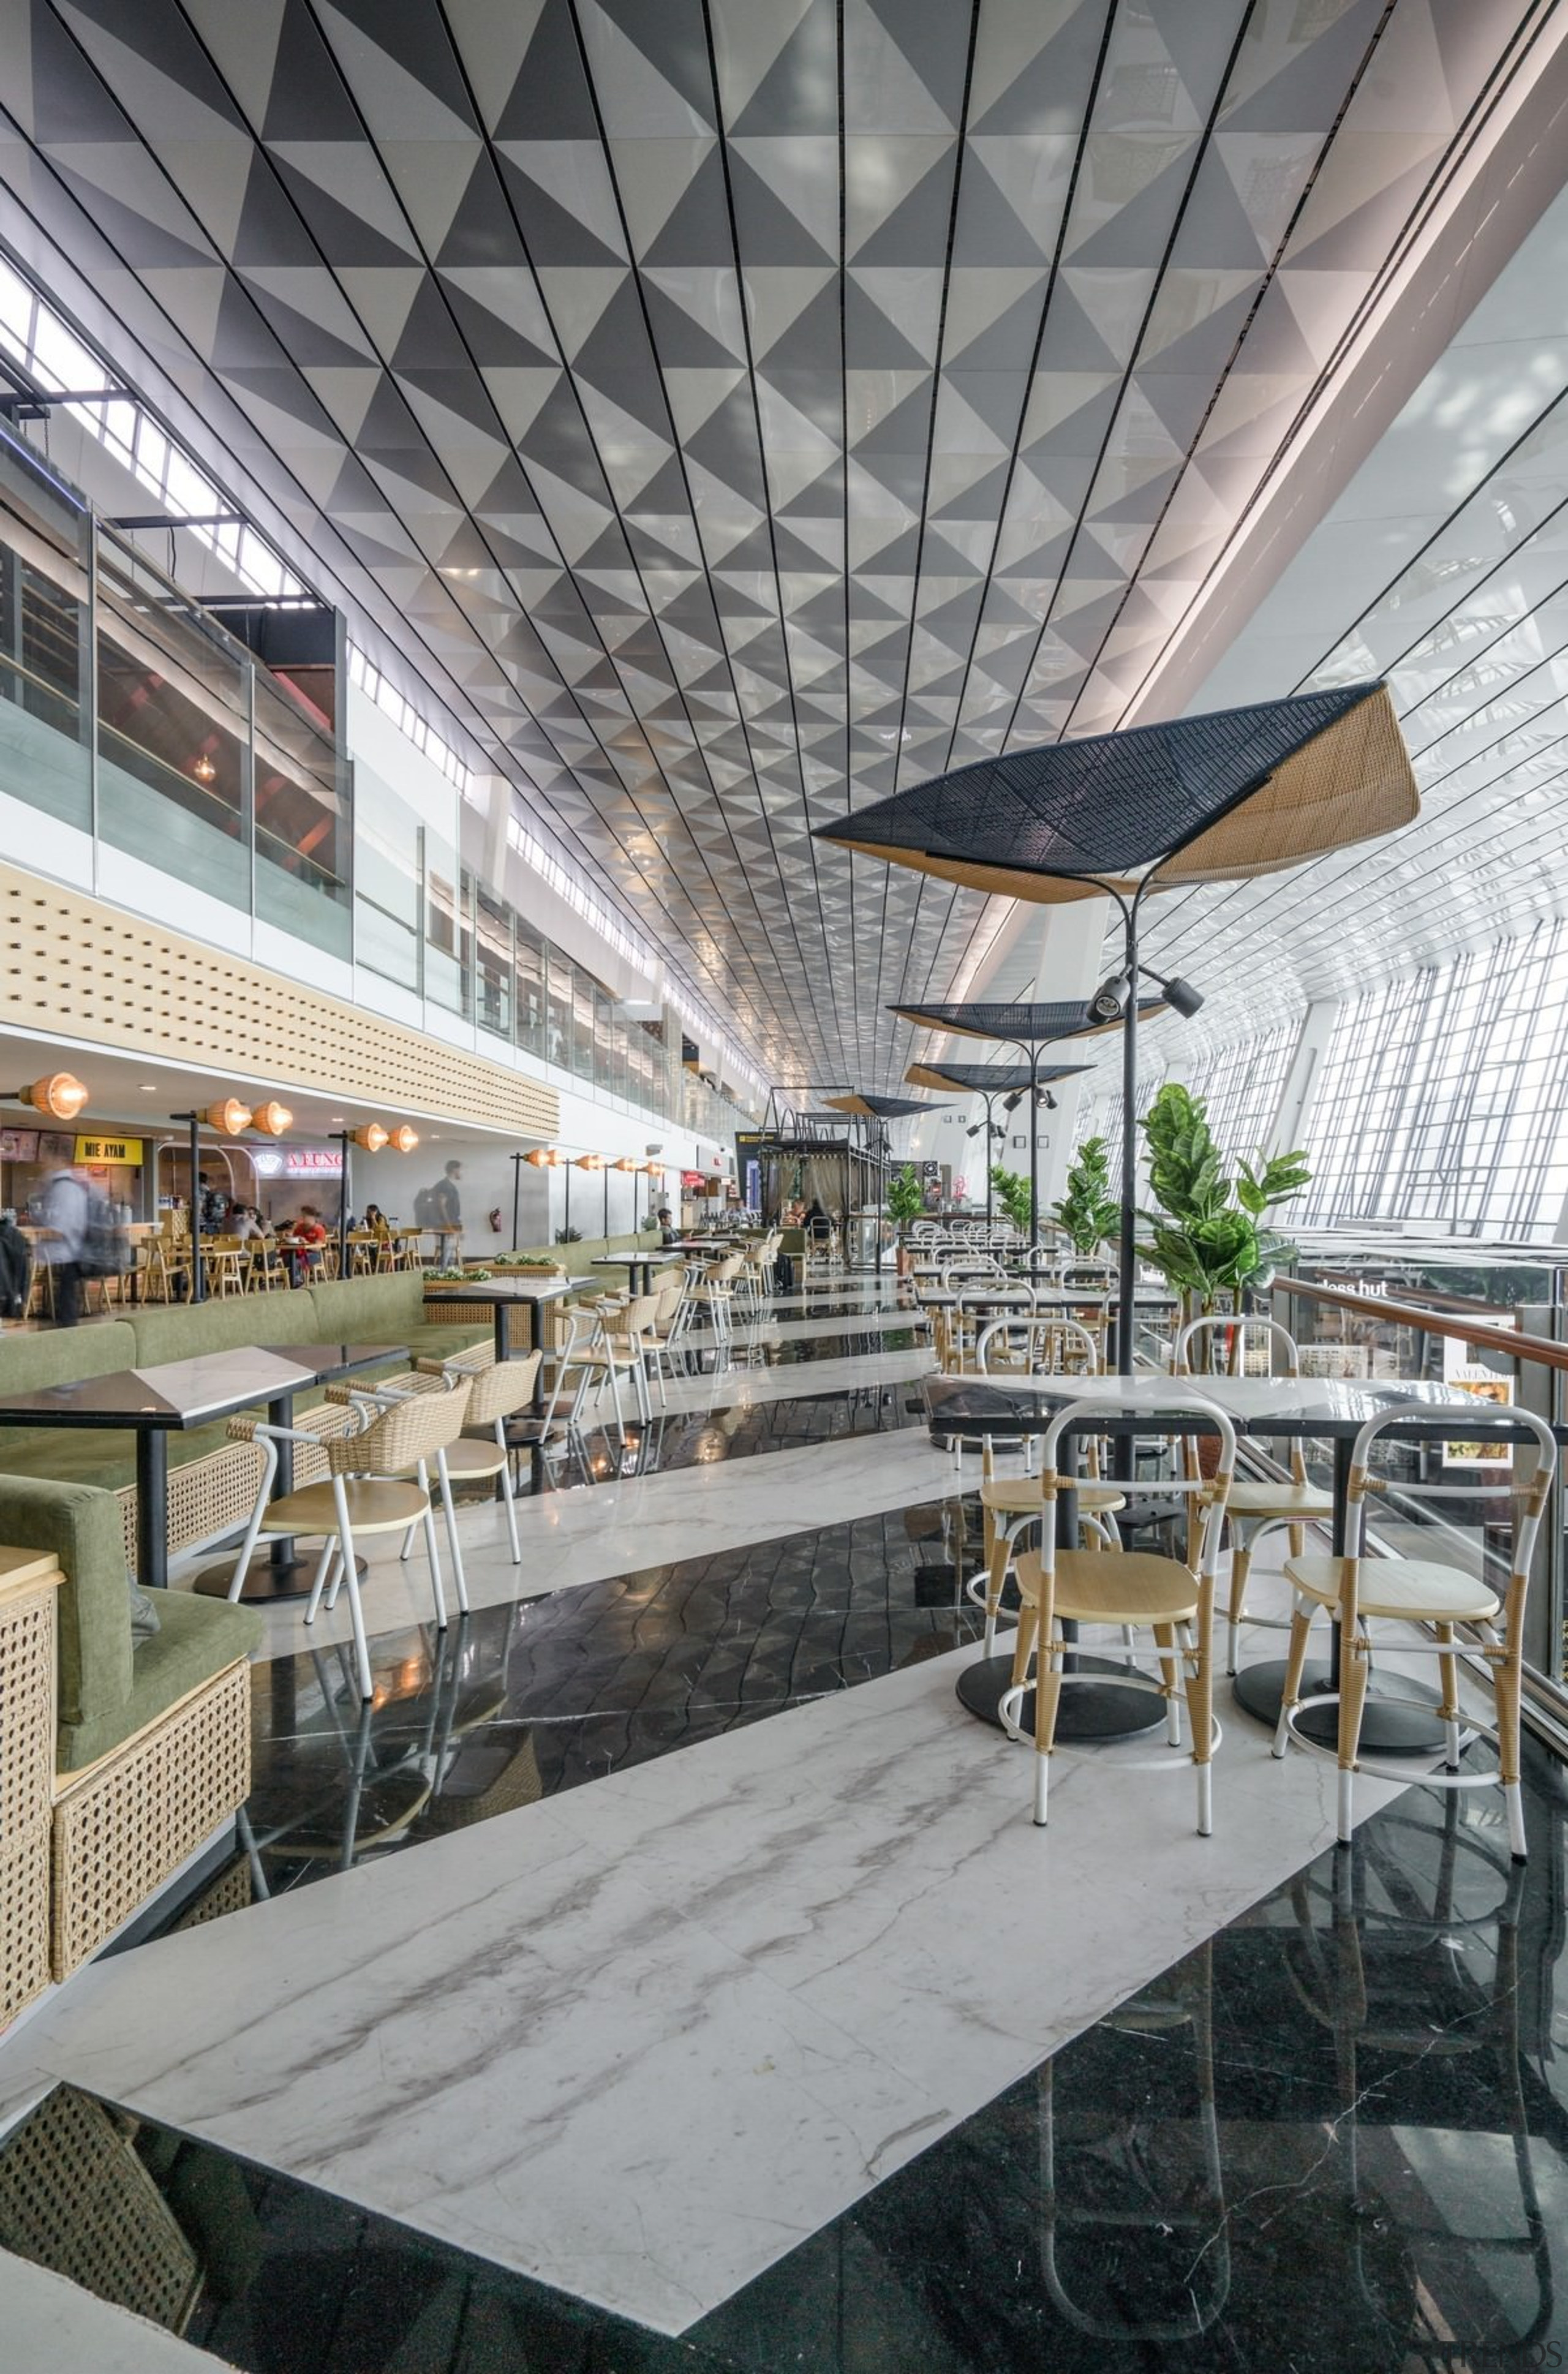 The terminal is one massive volume – important architecture, daylighting, interior design, gray